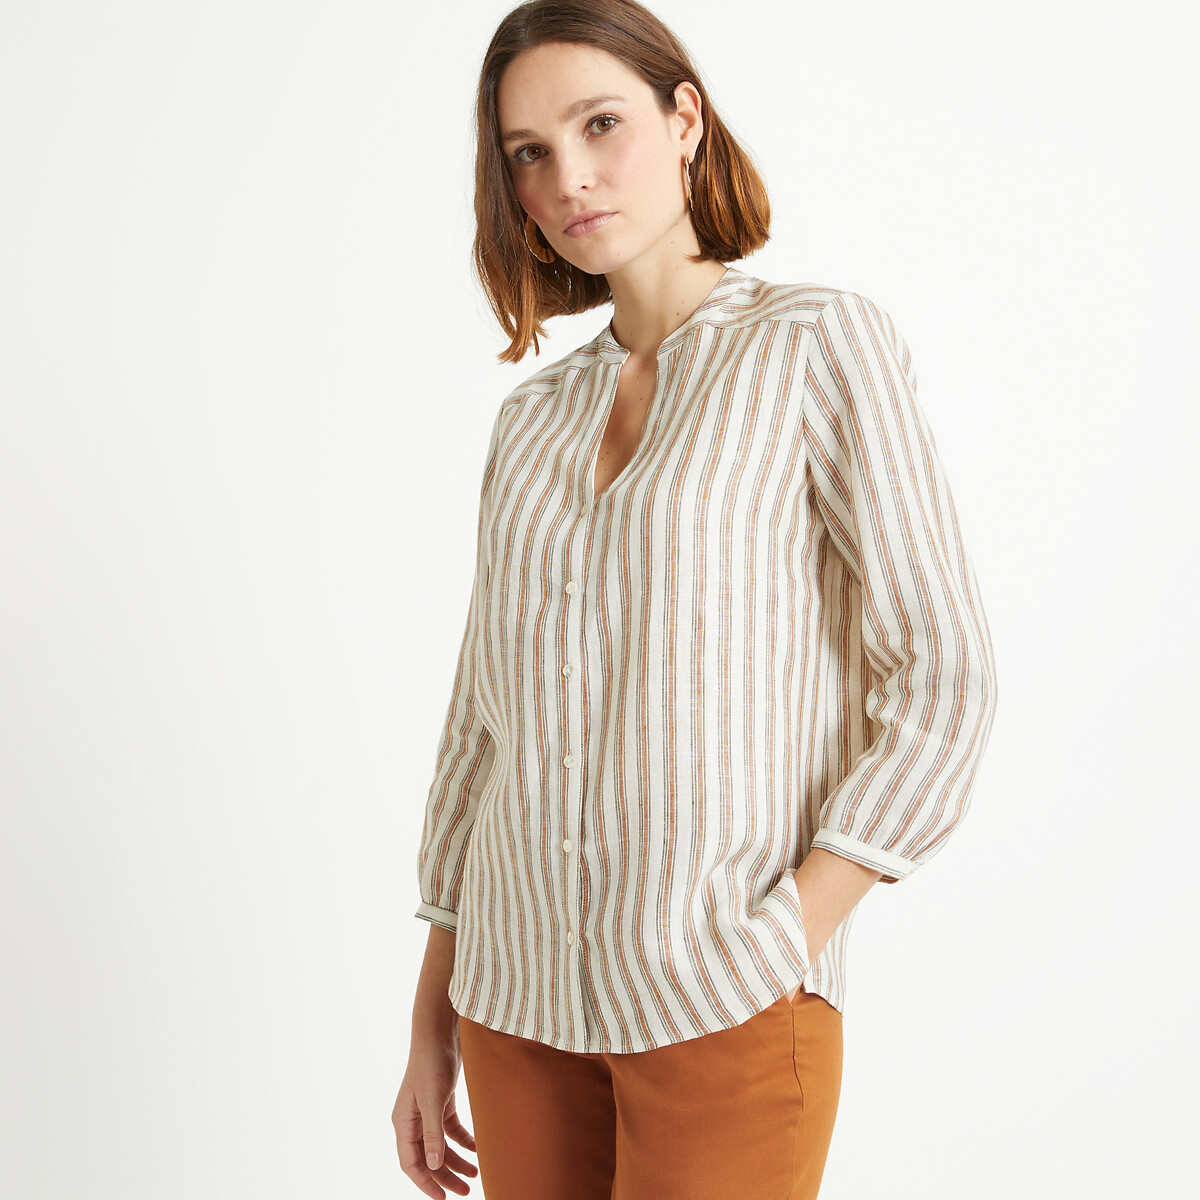 Striped Linen Blouse with Crew Neck and 3/4 Length Sleeves